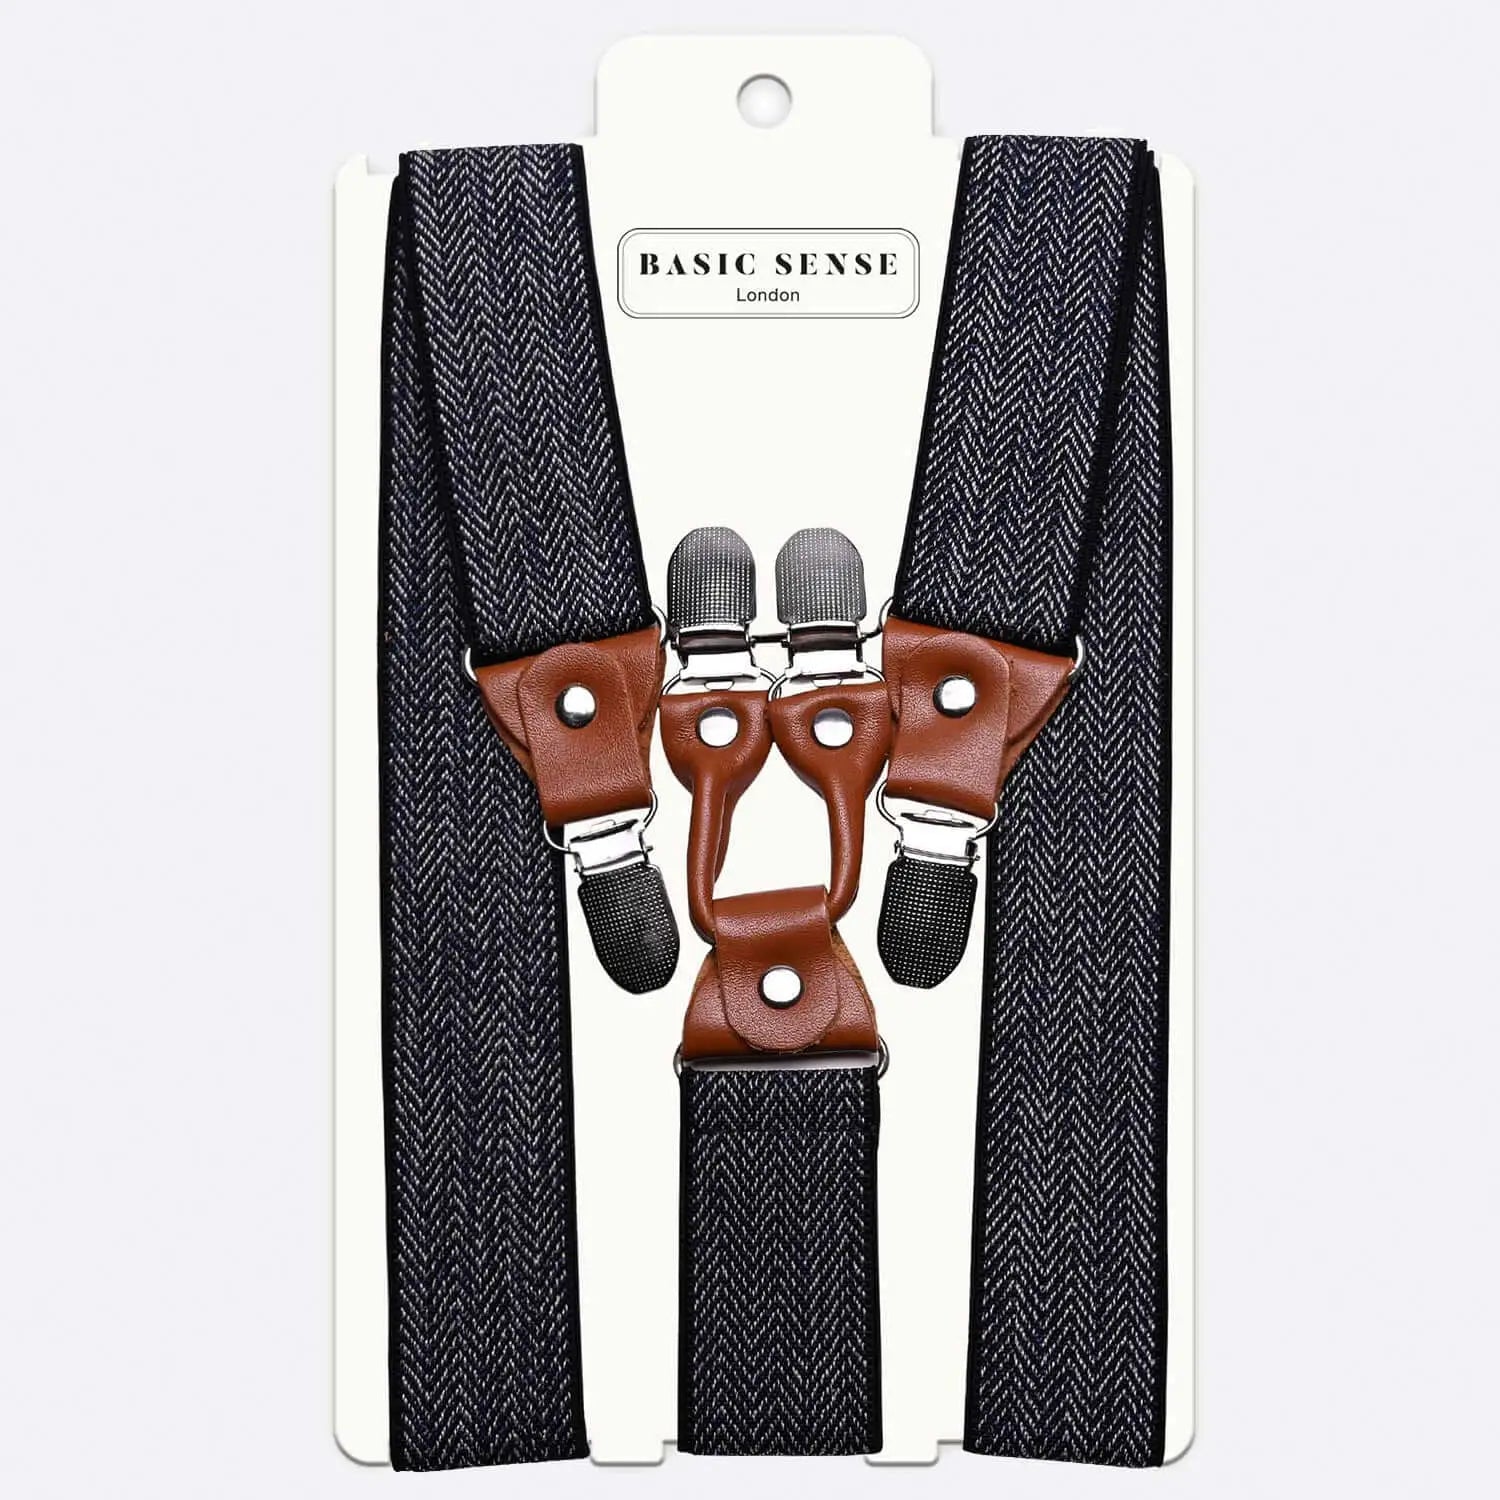 Men’s 35mm Y-Shape Wide Leather Braces with Stylish Patterns featuring man’s face design